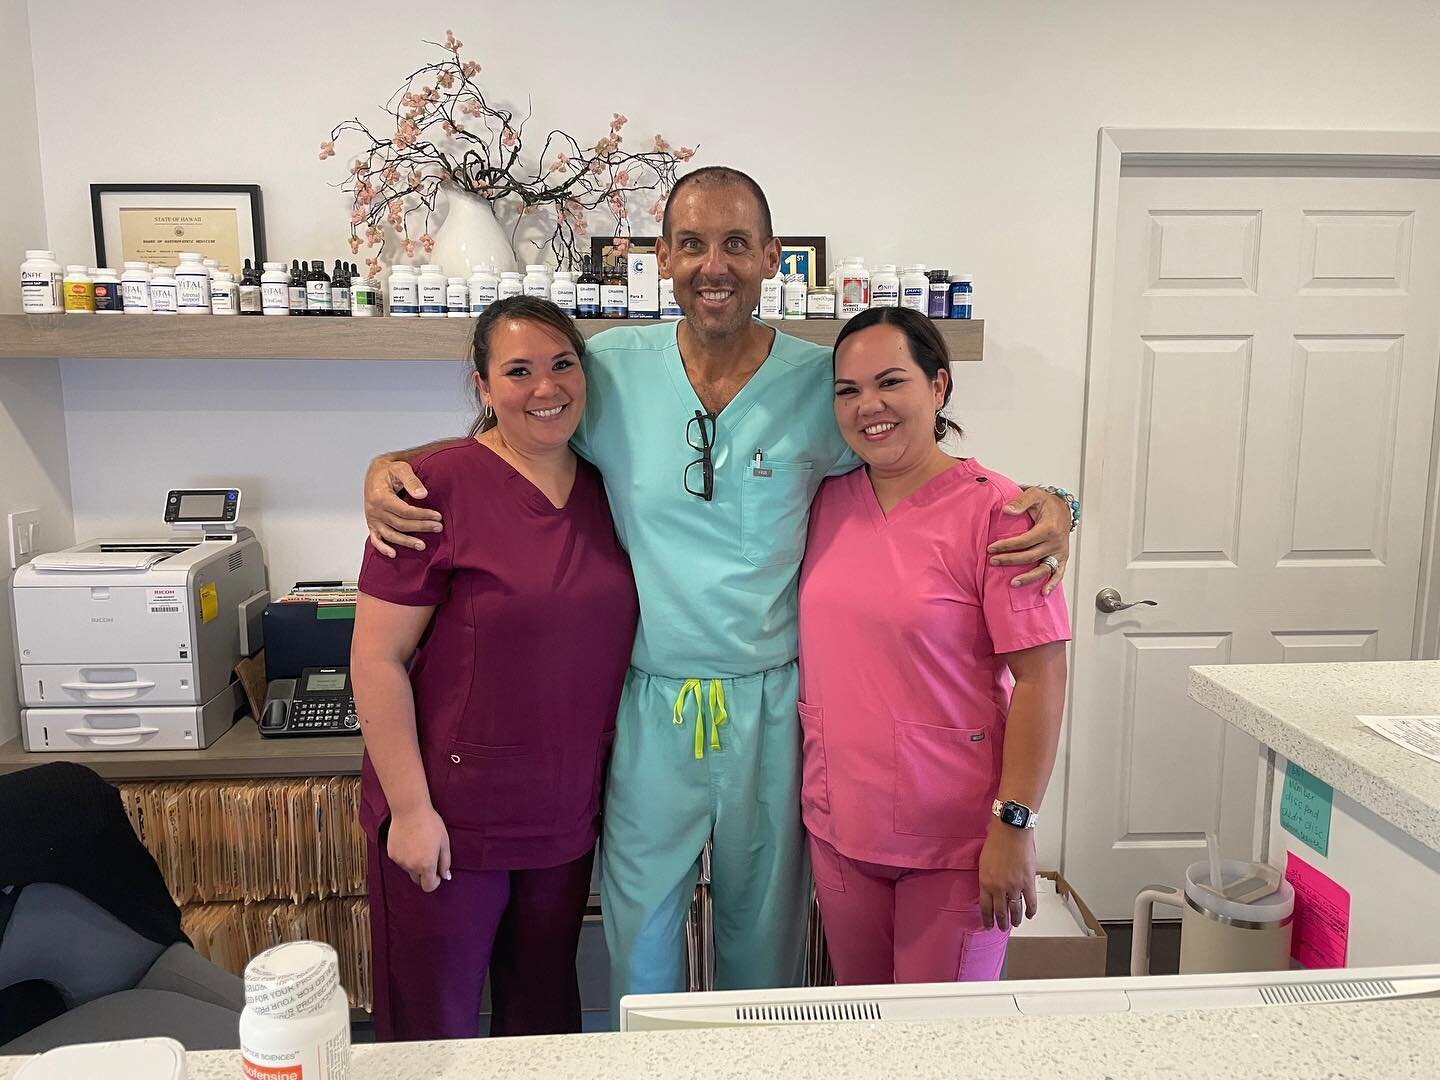 Happy Monday from our team at Kona Integrative Health! 

We are available for your IV and primary care needs. Give us a call to schedule at 808-339-7474. We would love to hear from you! 

Visit our website to learn more about our services at www.Kona